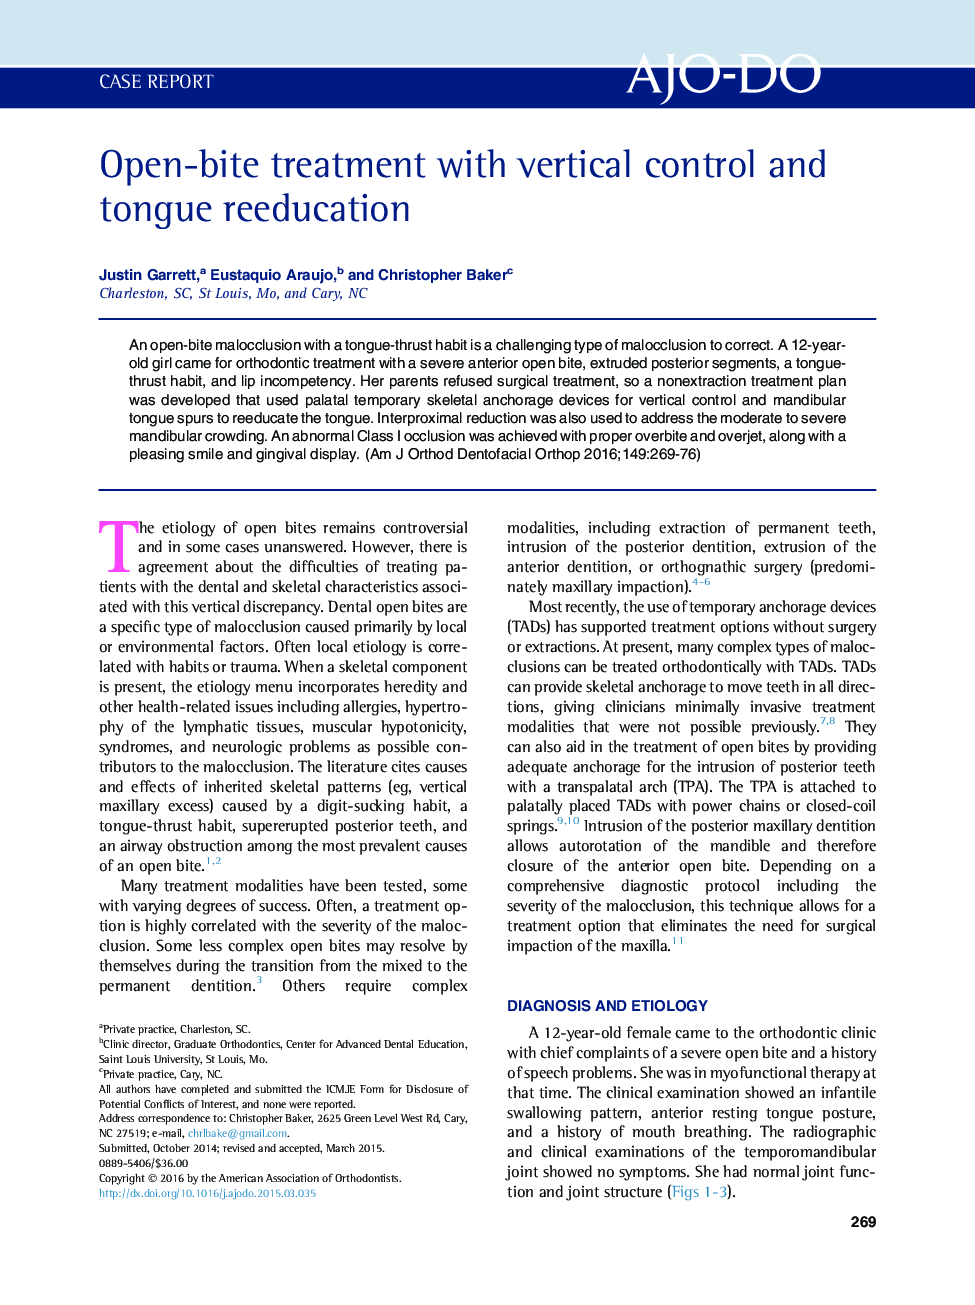 Open-bite treatment with vertical control and tongue reeducation 